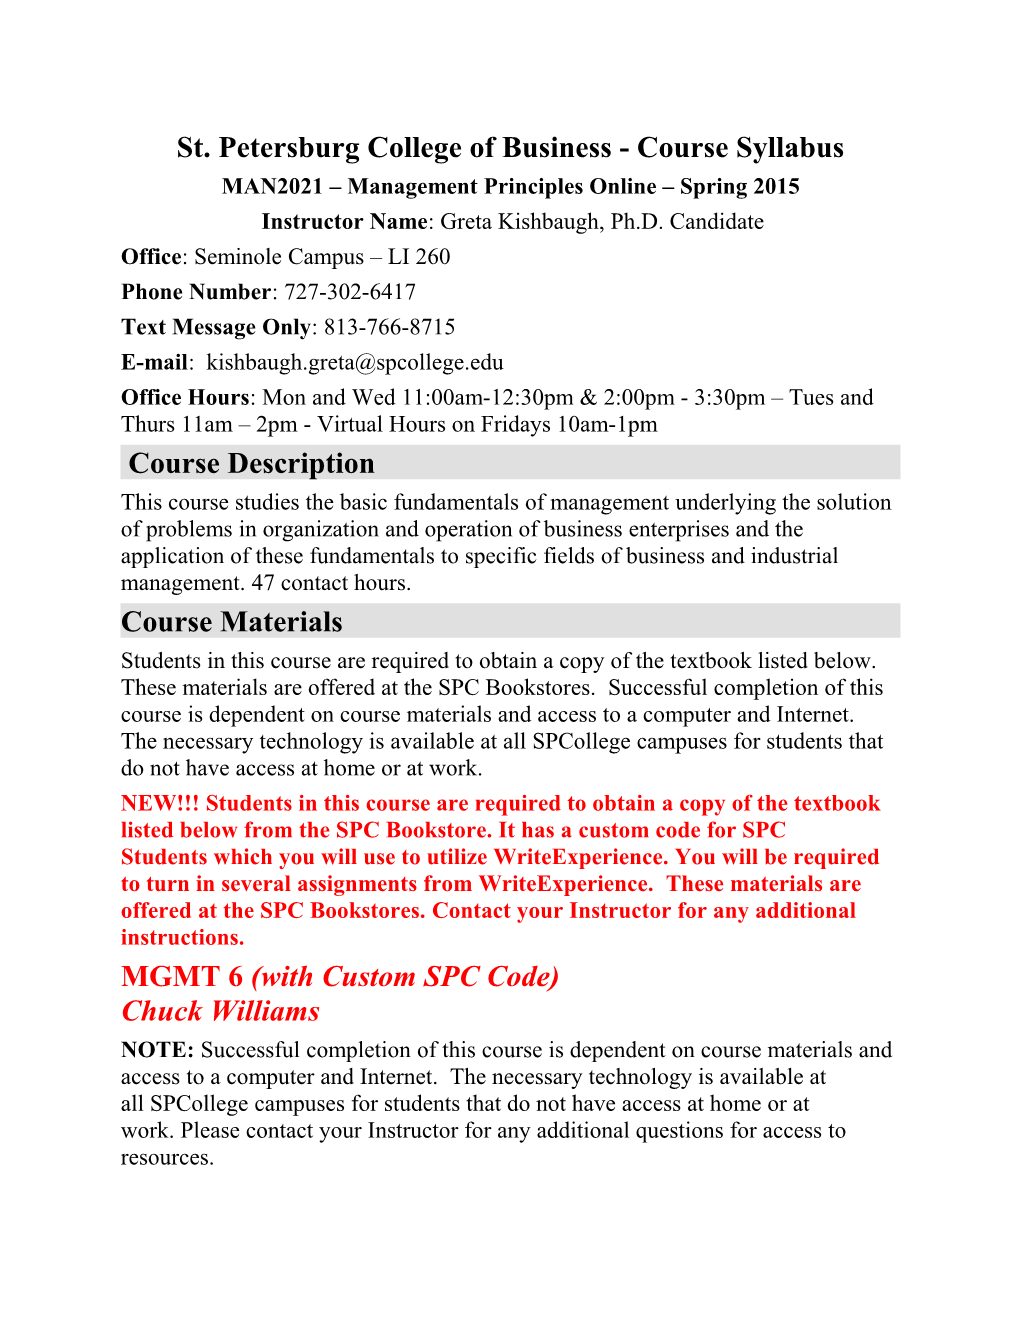 St. Petersburg College of Business - Course Syllabus